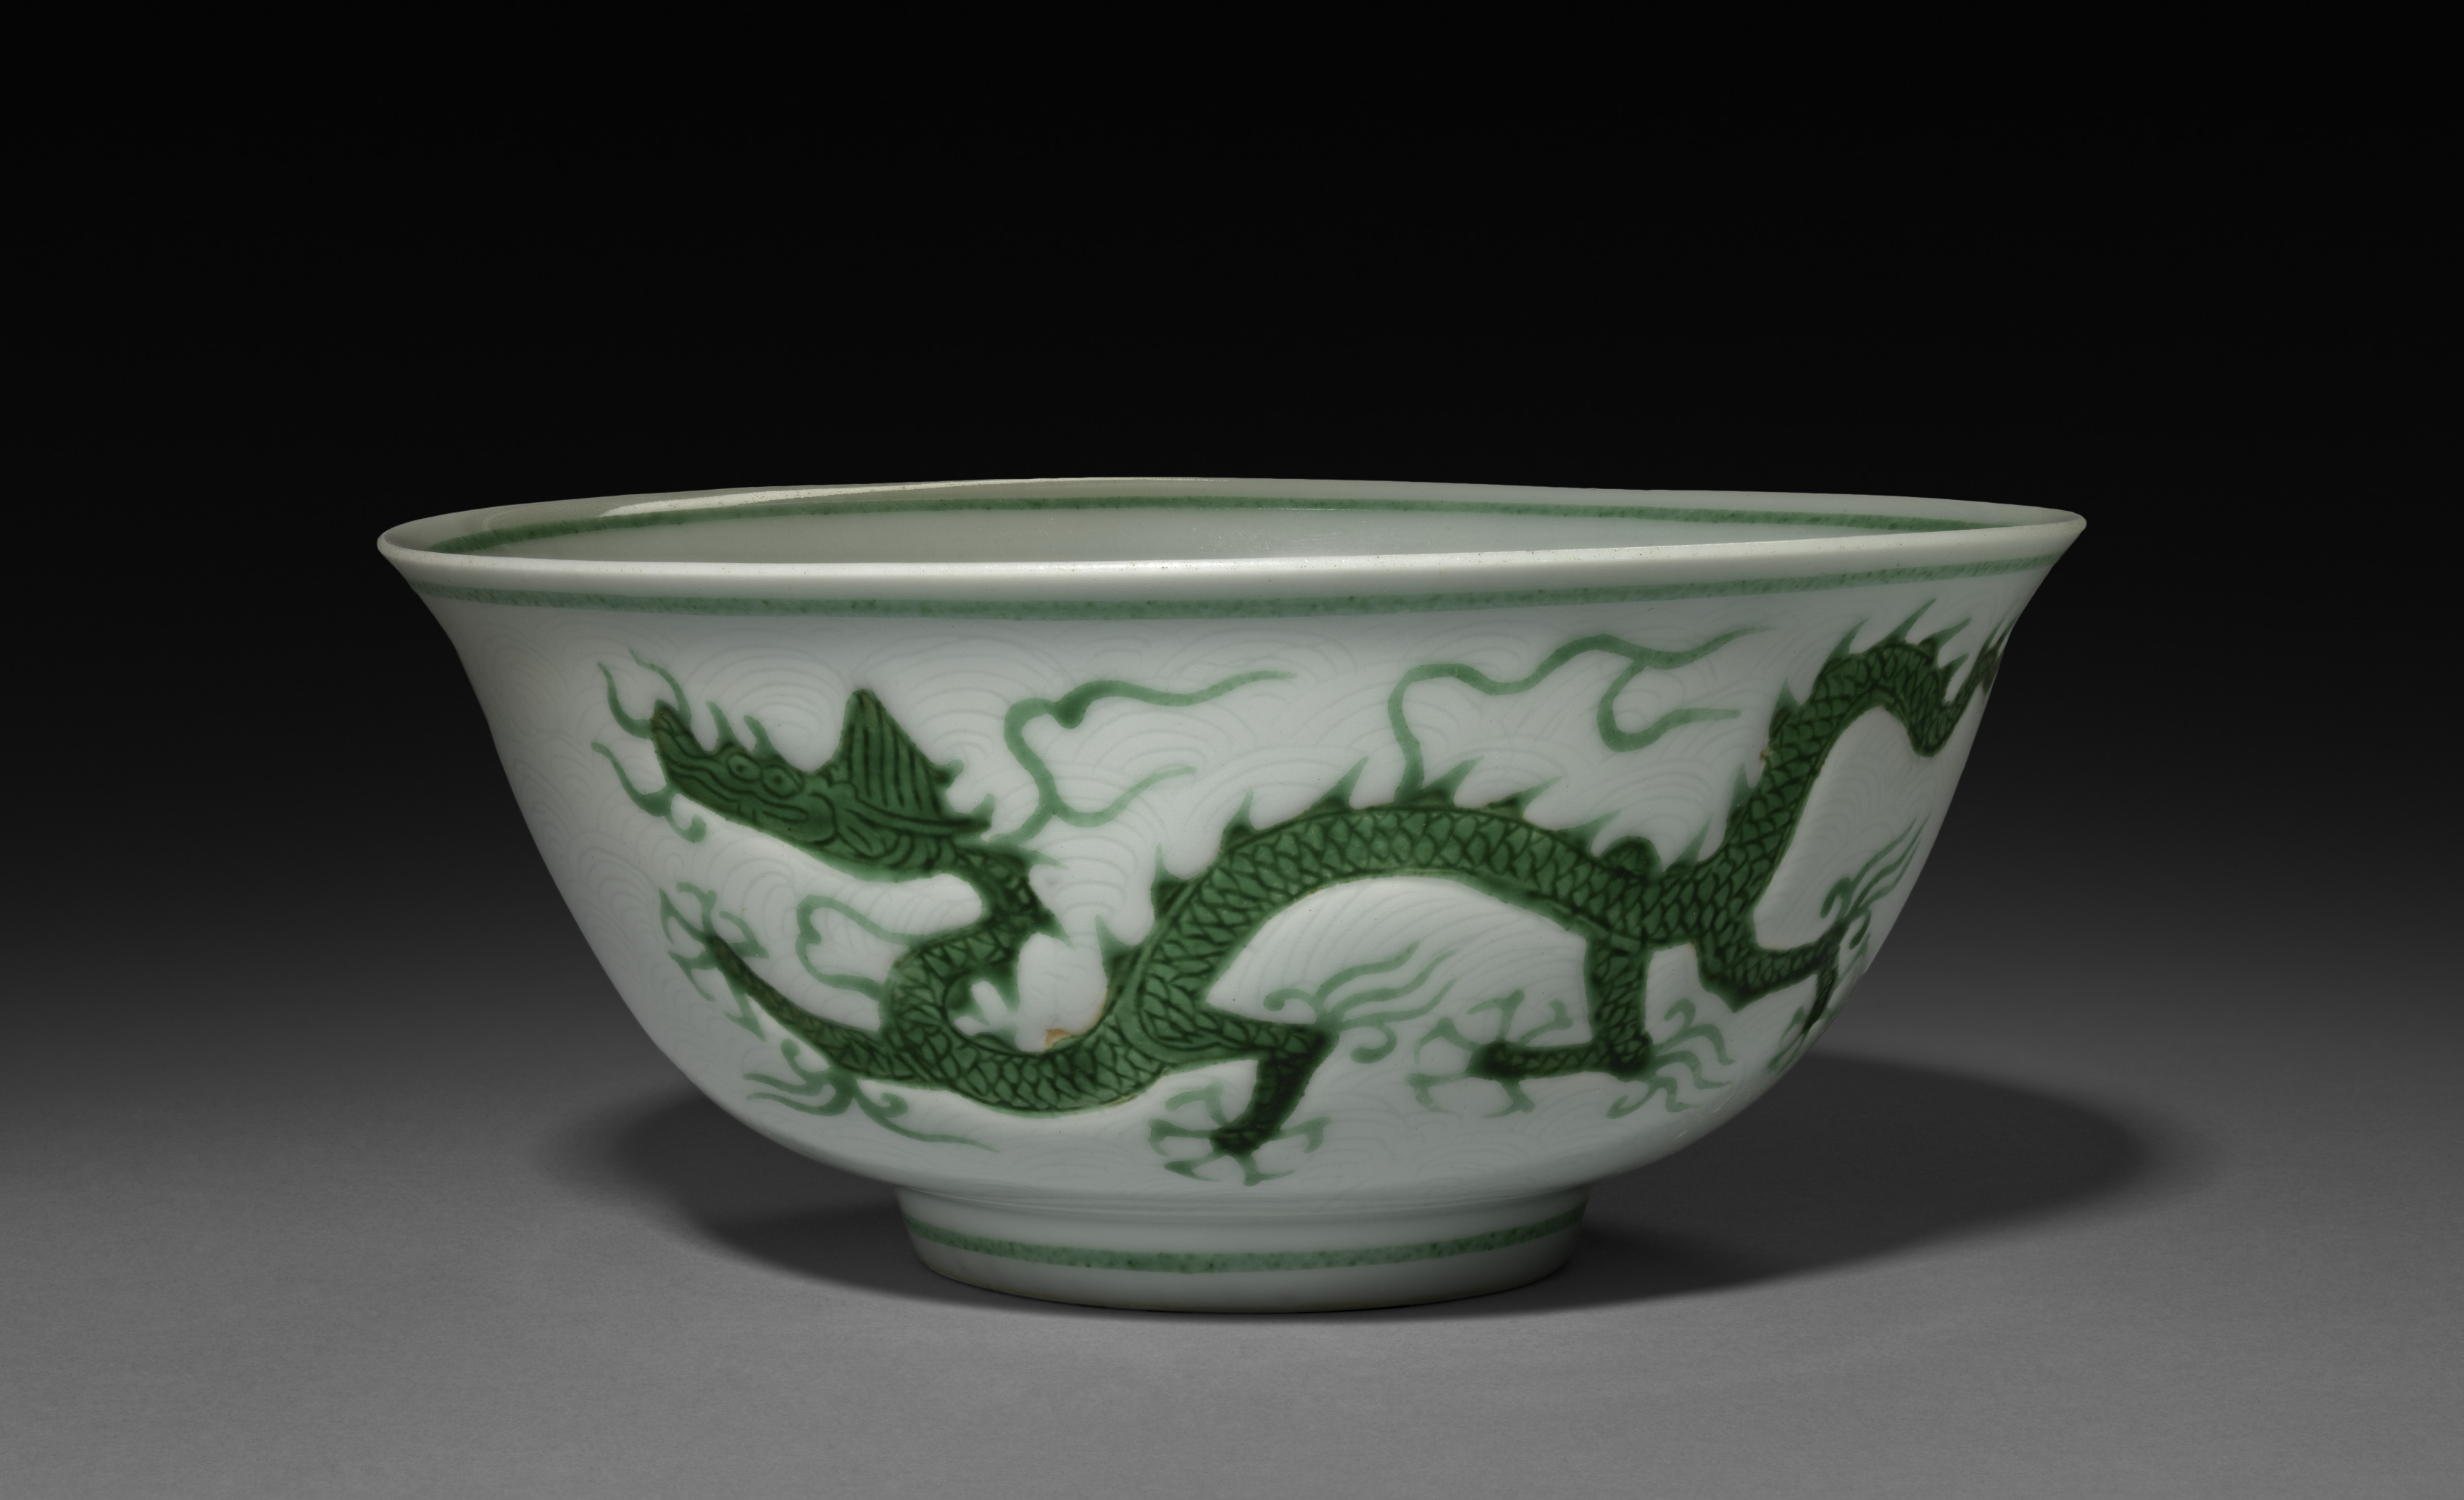 Bowl with Dragons in Waves